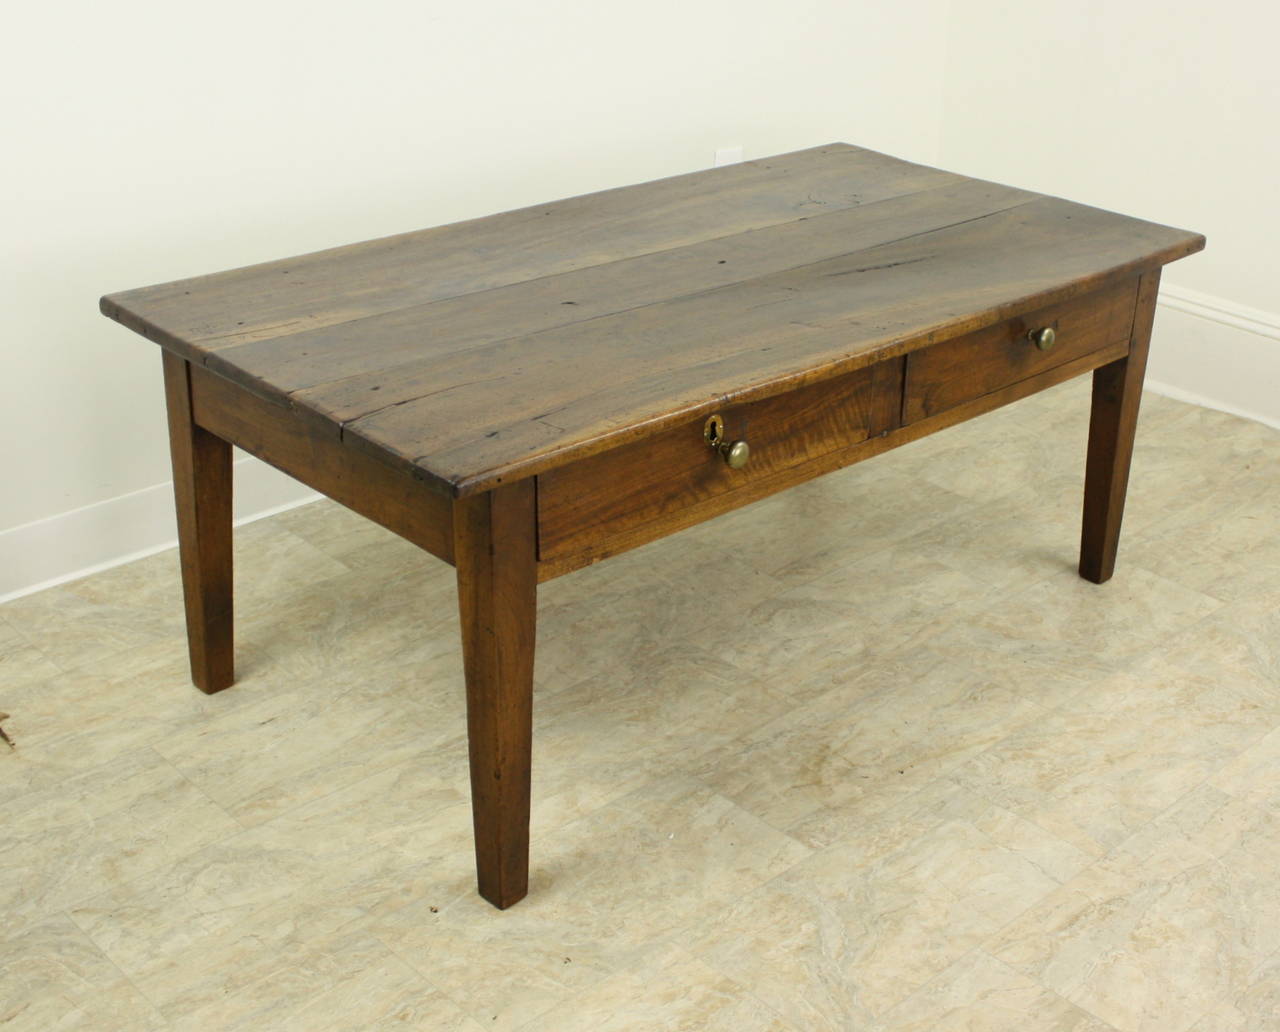 A handsome silhouette in well grained walnut.  The top has dramatic color and lovely patina.  Two drawers at the front, including a hand wrought key hole,  add an interesting design note, The gently tapered legs are sturdy, and add to the overall